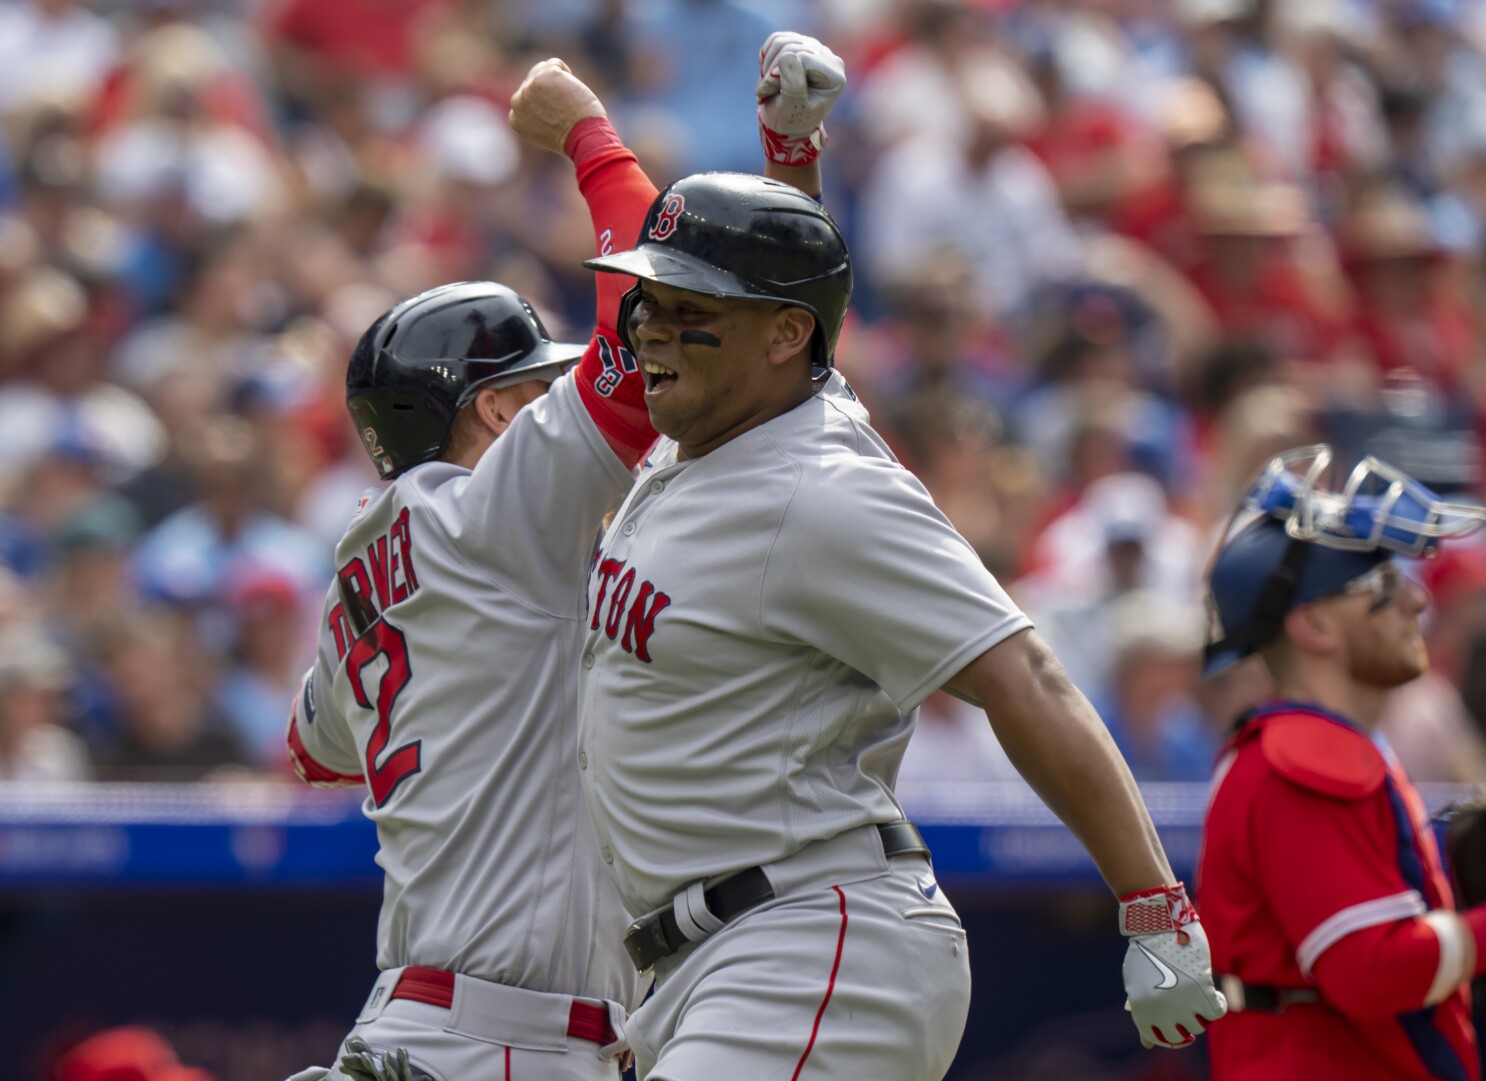 Devers hits 20th home run Red Sox beat Blue Jays 7-6 to spoil Canada Day celebrations | AP News